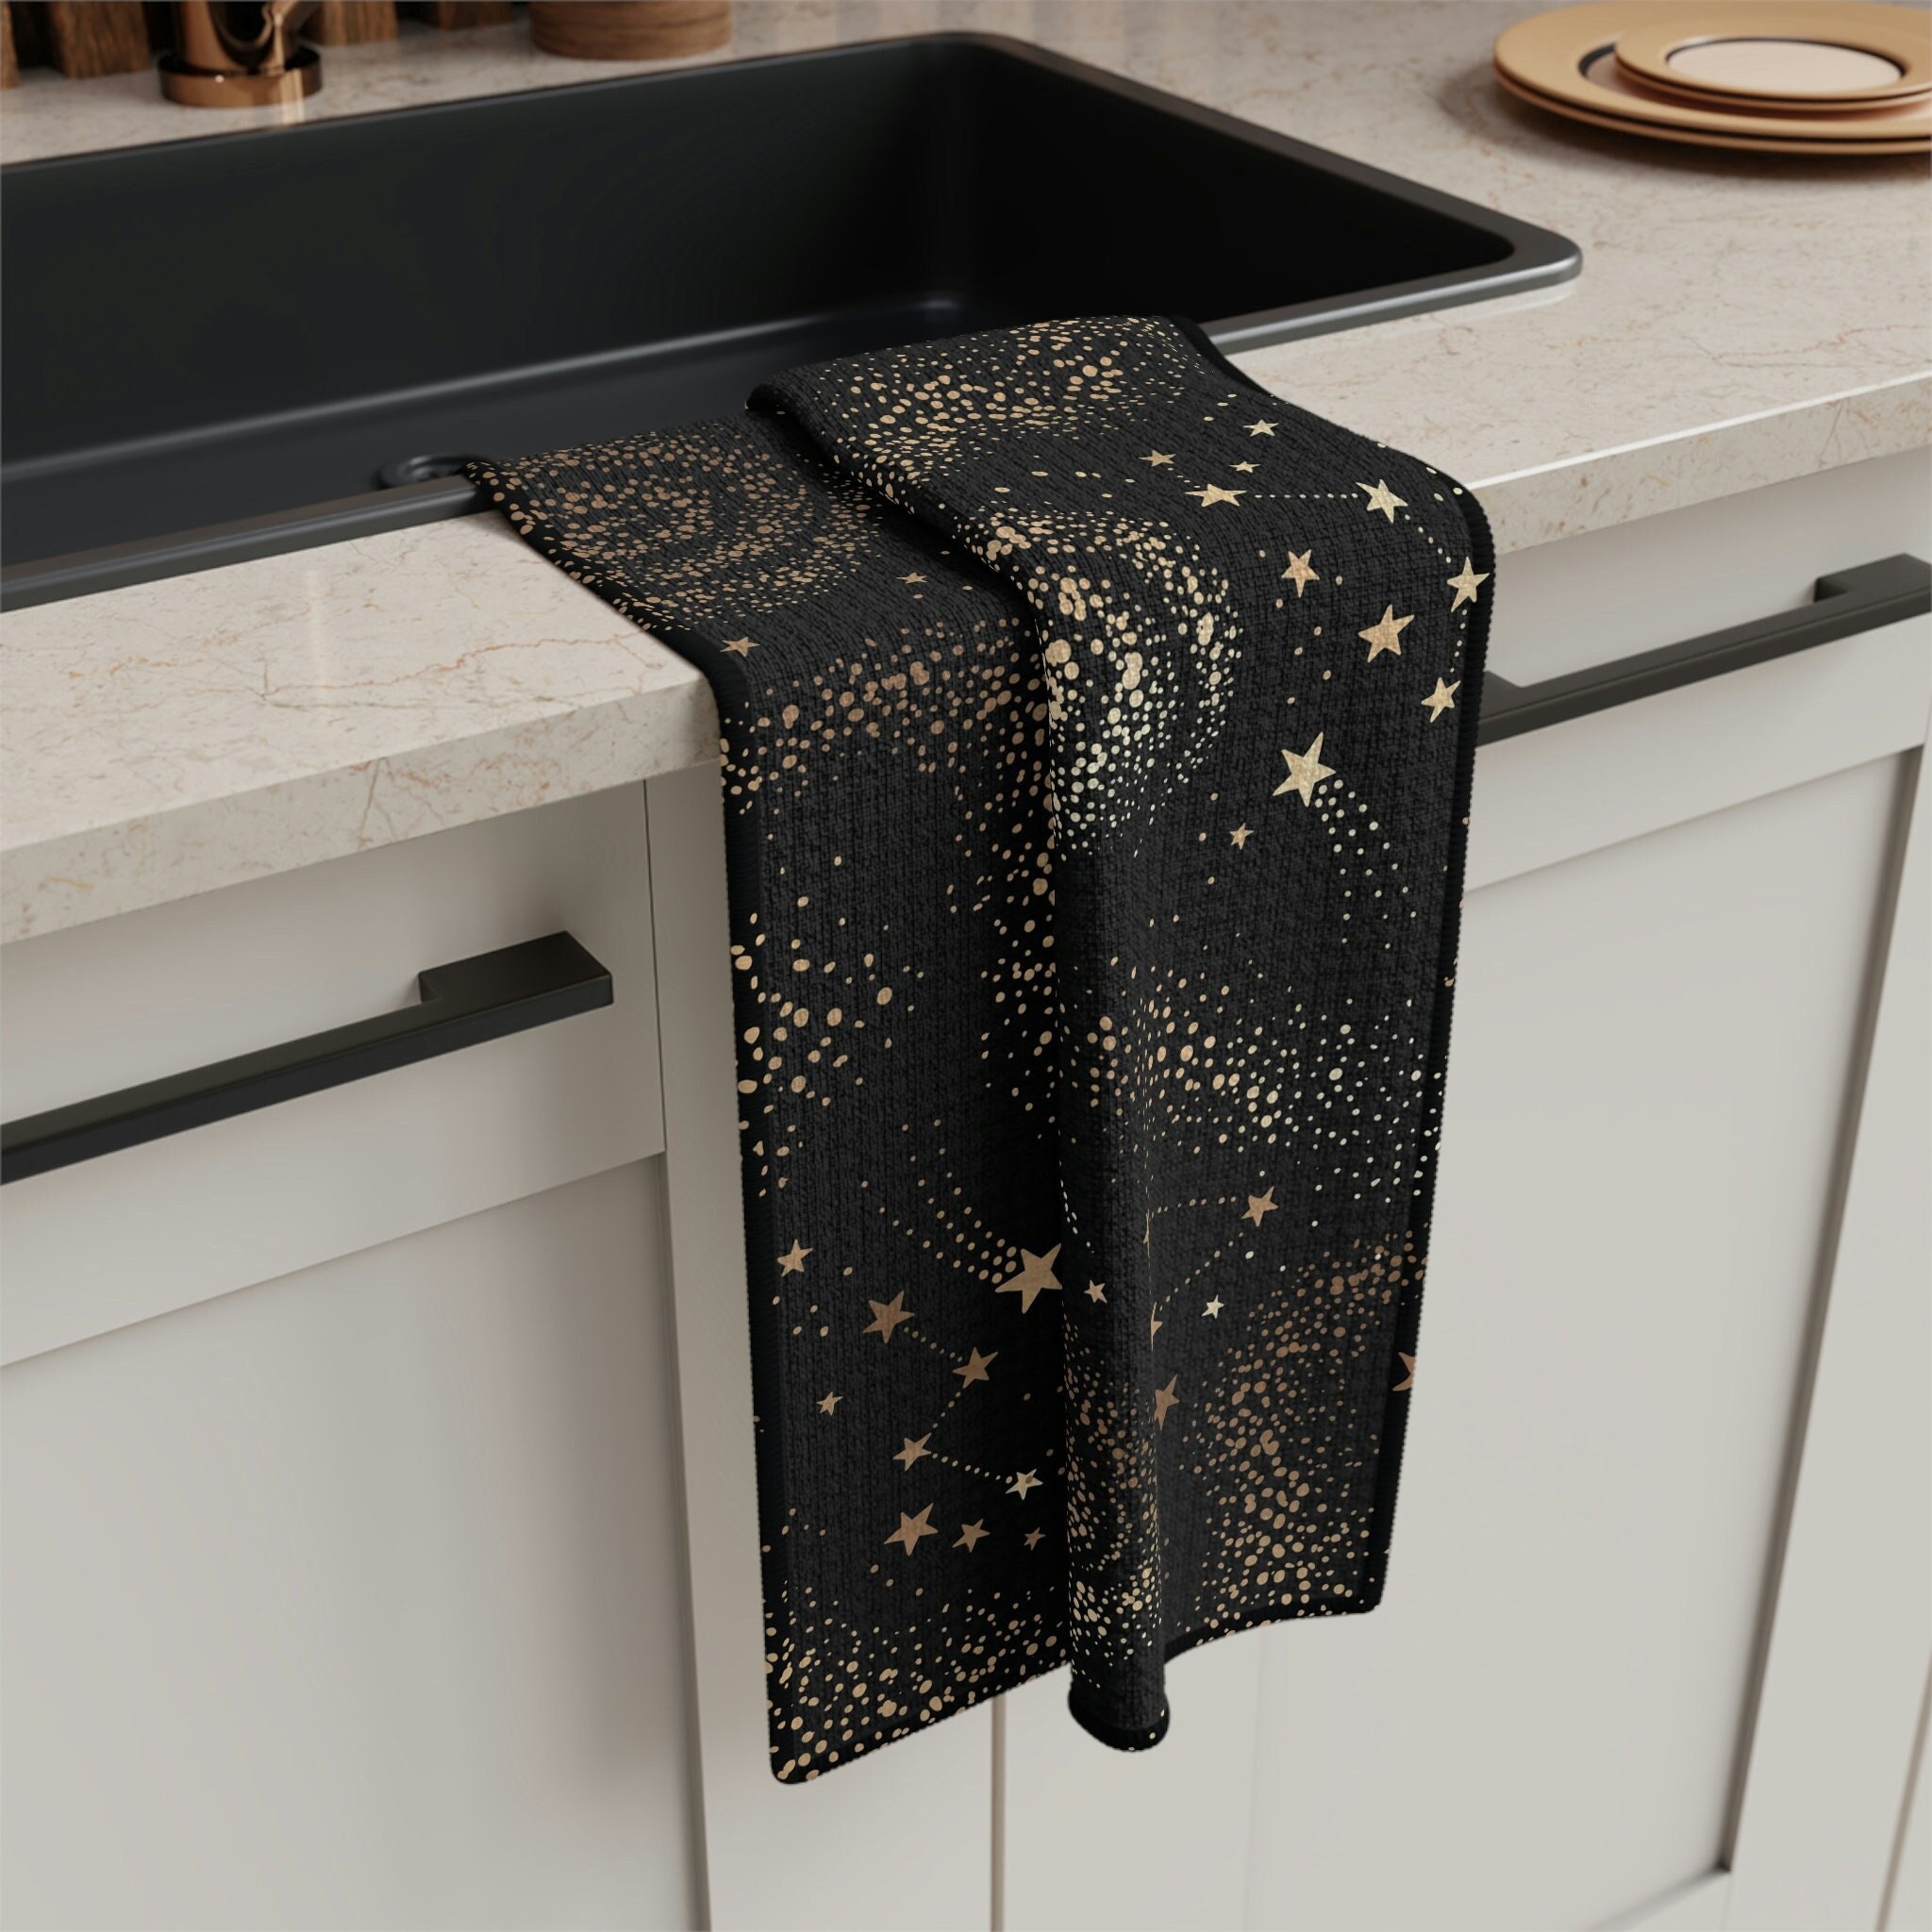  Artwork Store Kitchen Towels 4 Pack,Merry Christmas Gold  Snowflake Black Kitchen Dish Towels Soft Absorbent Cotton Drying Cloth,Tea  Towels/Bar Towels/Hand Towels for Kitchen Bathroom : Home & Kitchen